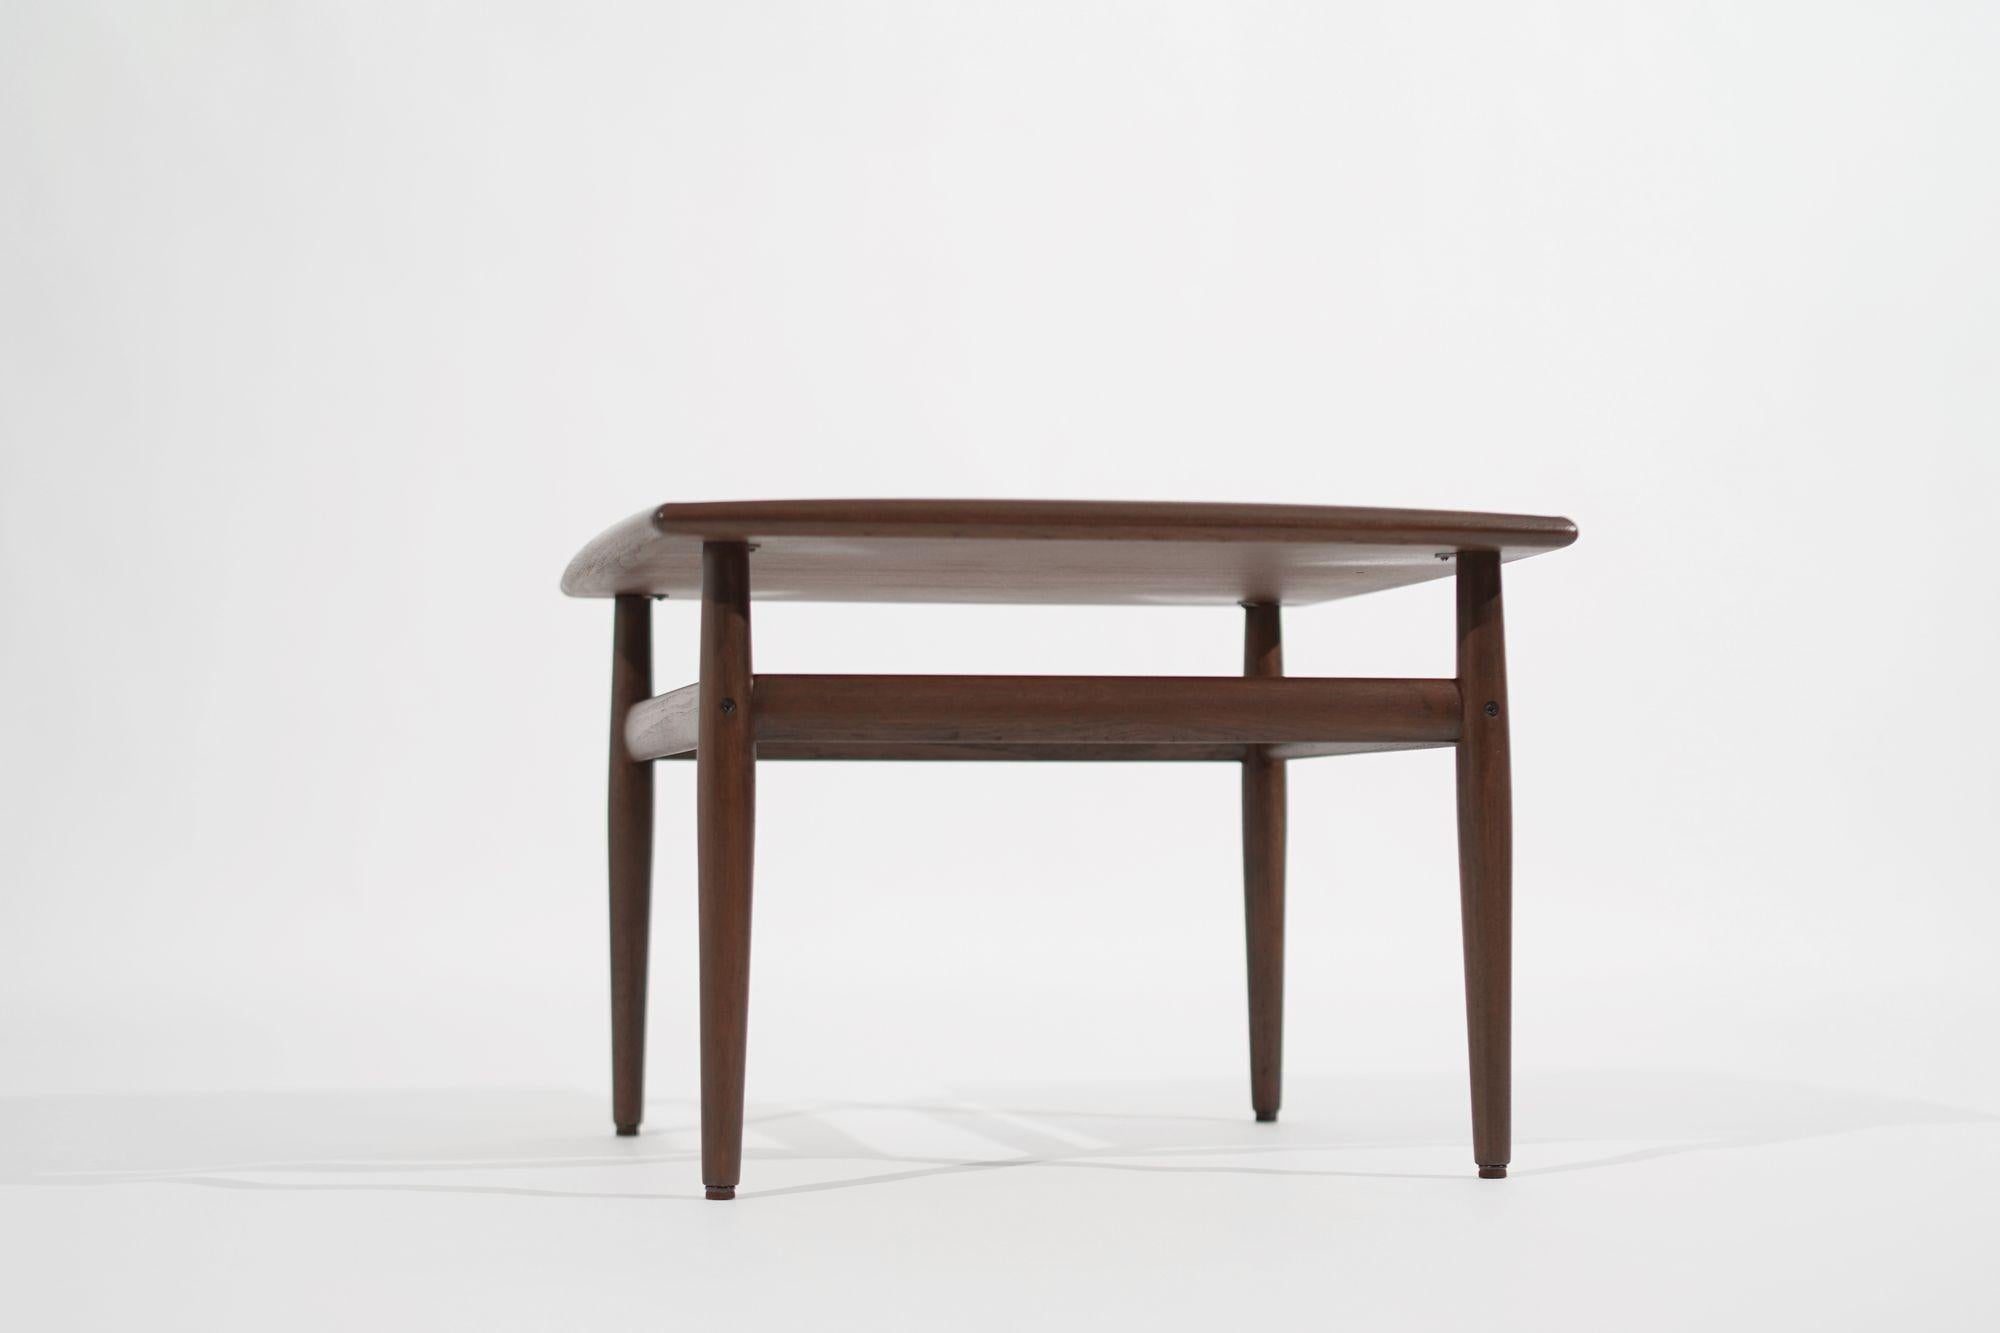 20th Century Teak Coffee Table by Grete Jalk, Denmark, C. 1950s For Sale